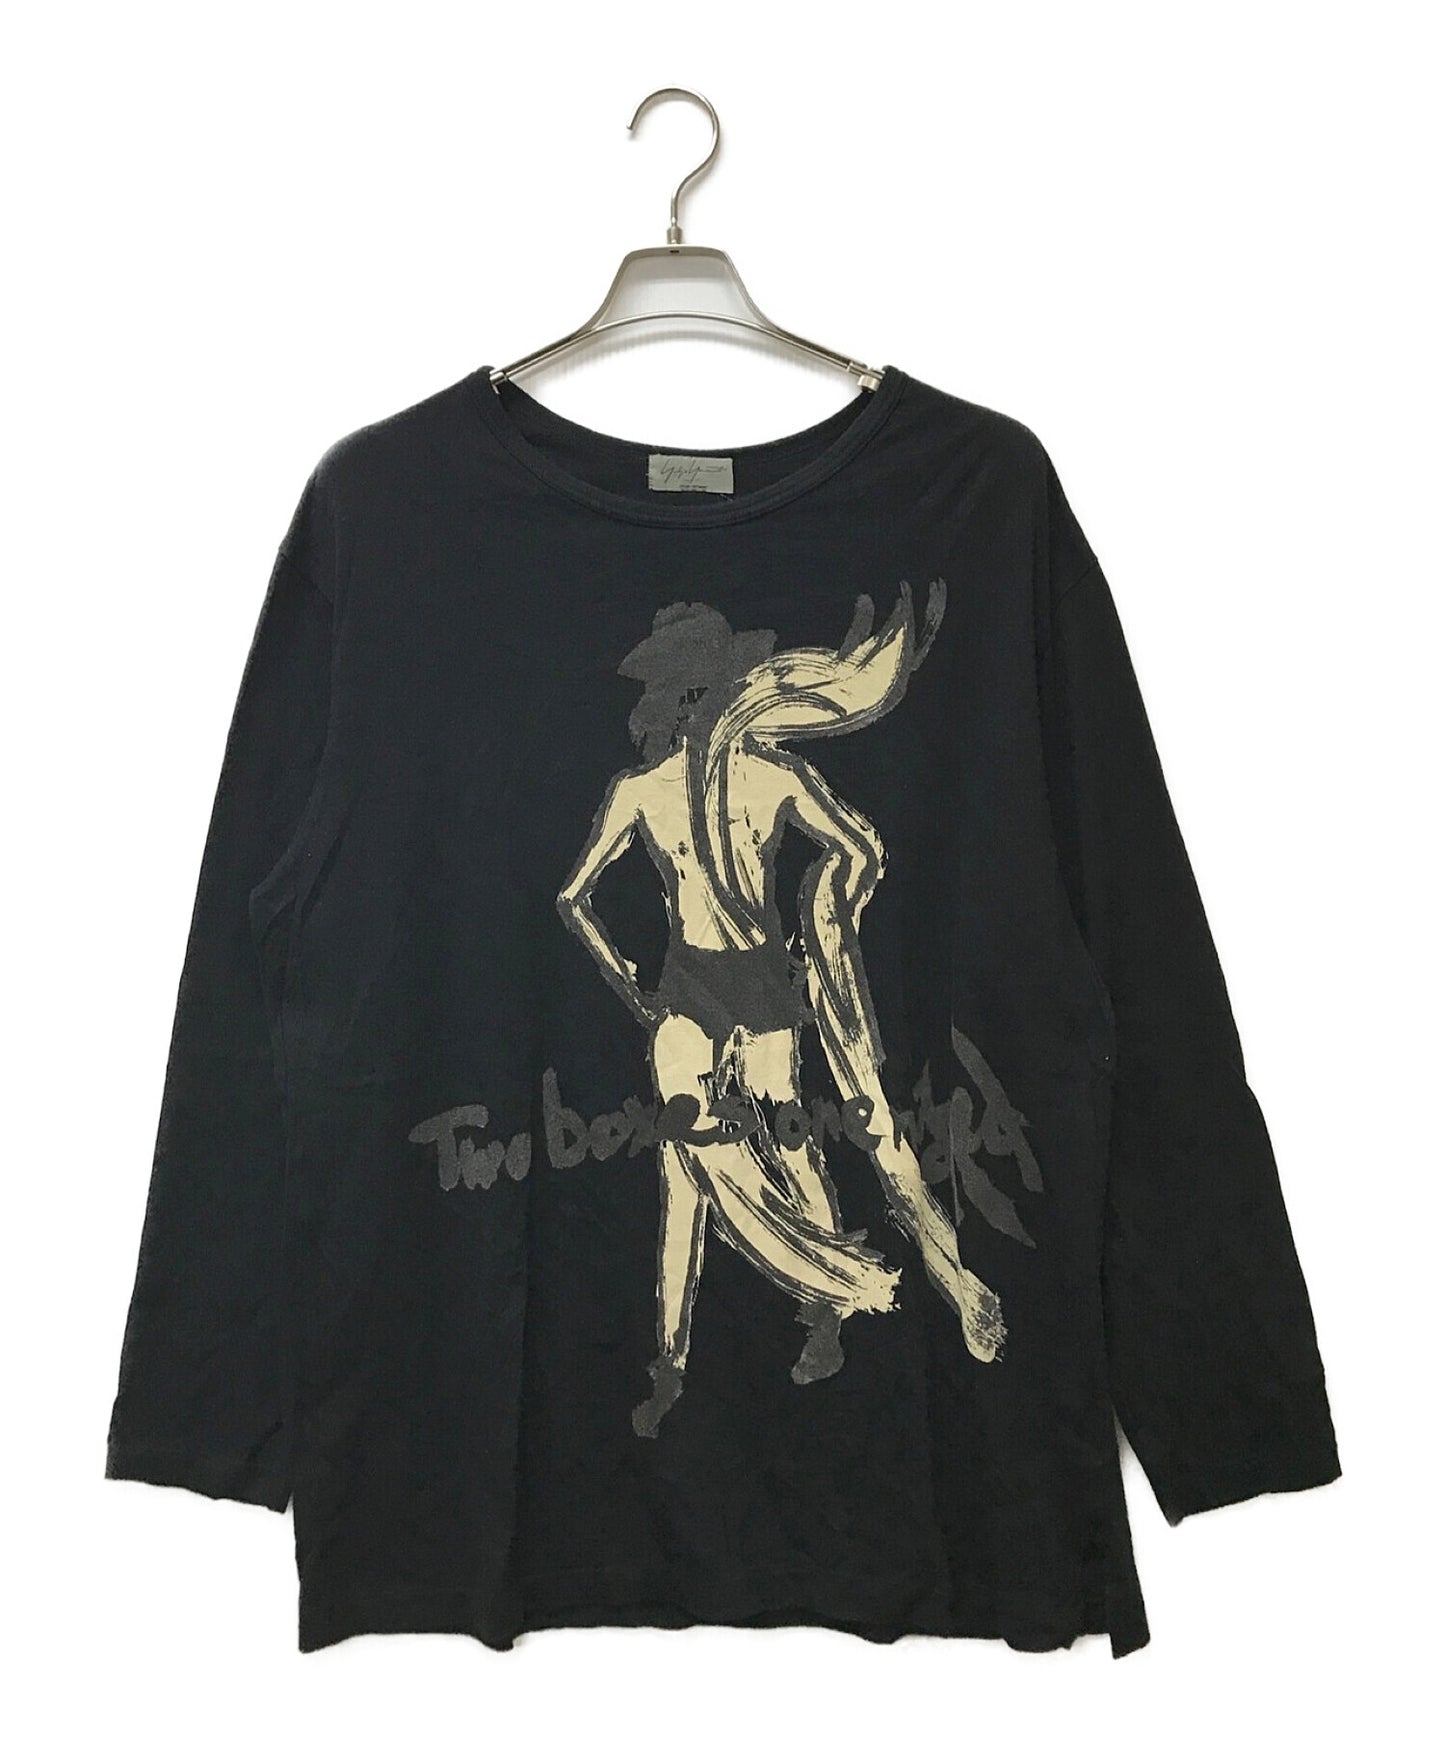 [Pre-owned] Yohji Yamamoto pour homme Two boxes one night print L/S cut and sewn HO-T29-084